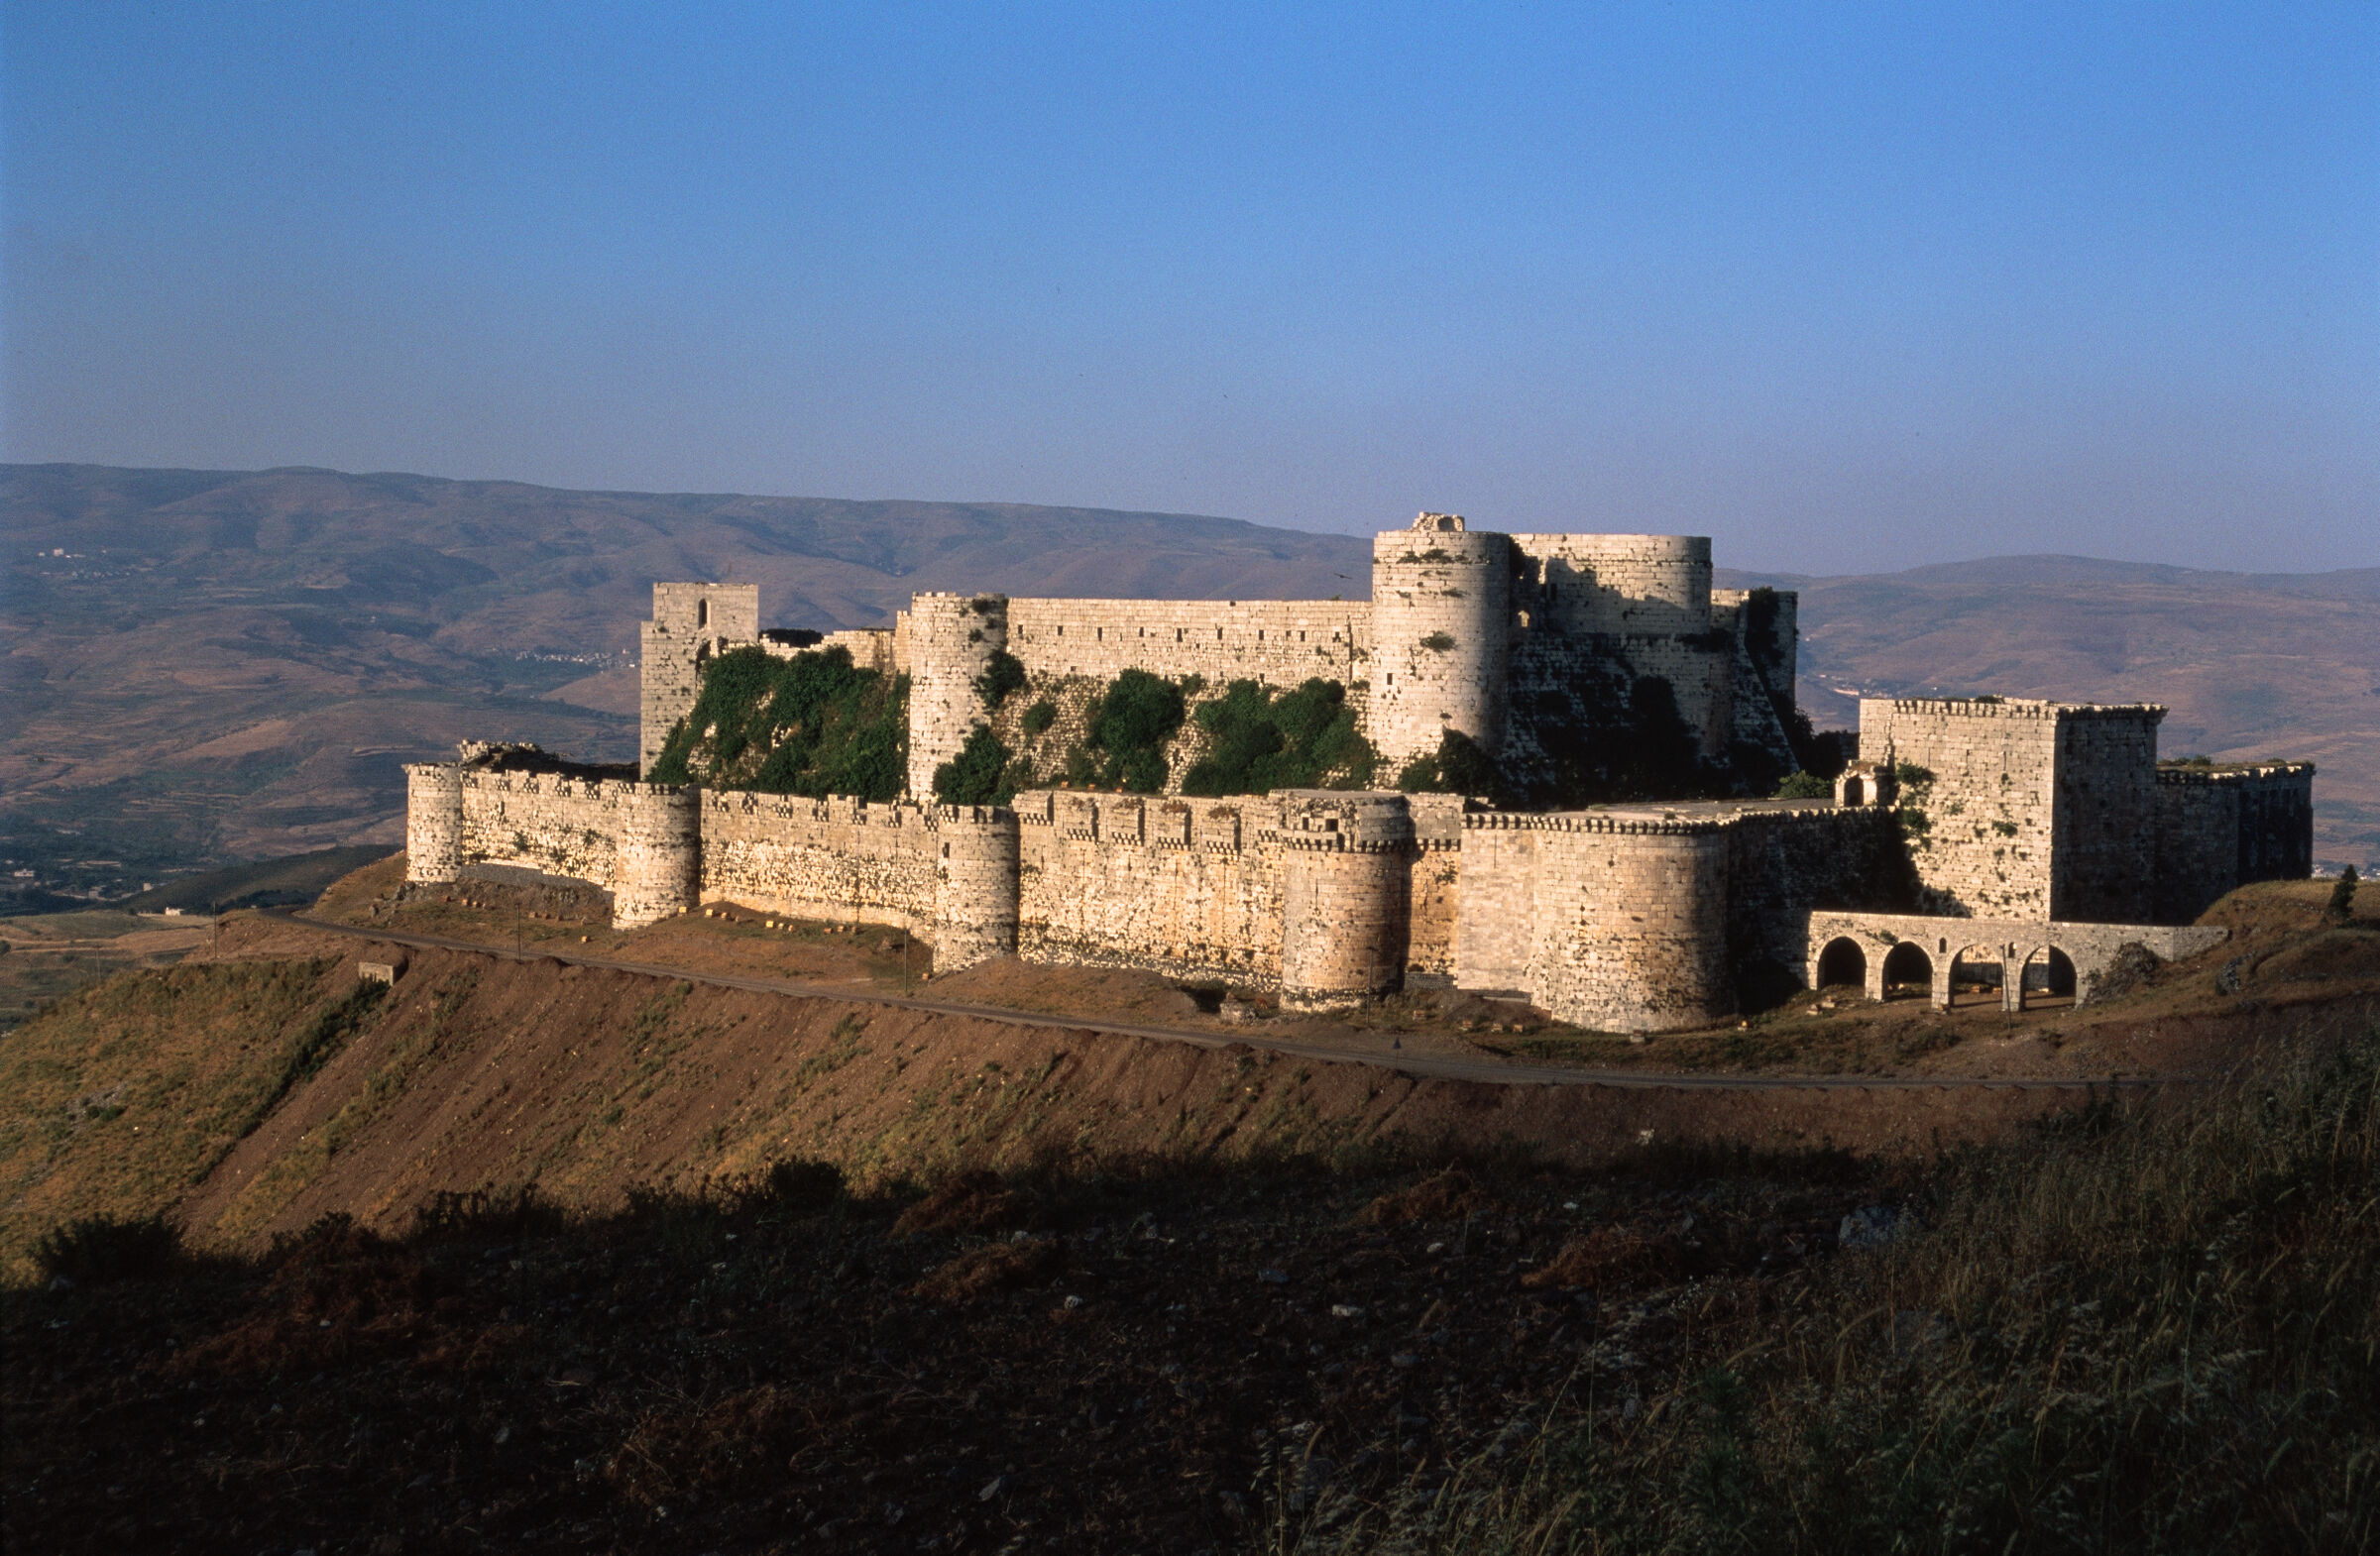 Overview of the Krak des Chevaliers fortress 